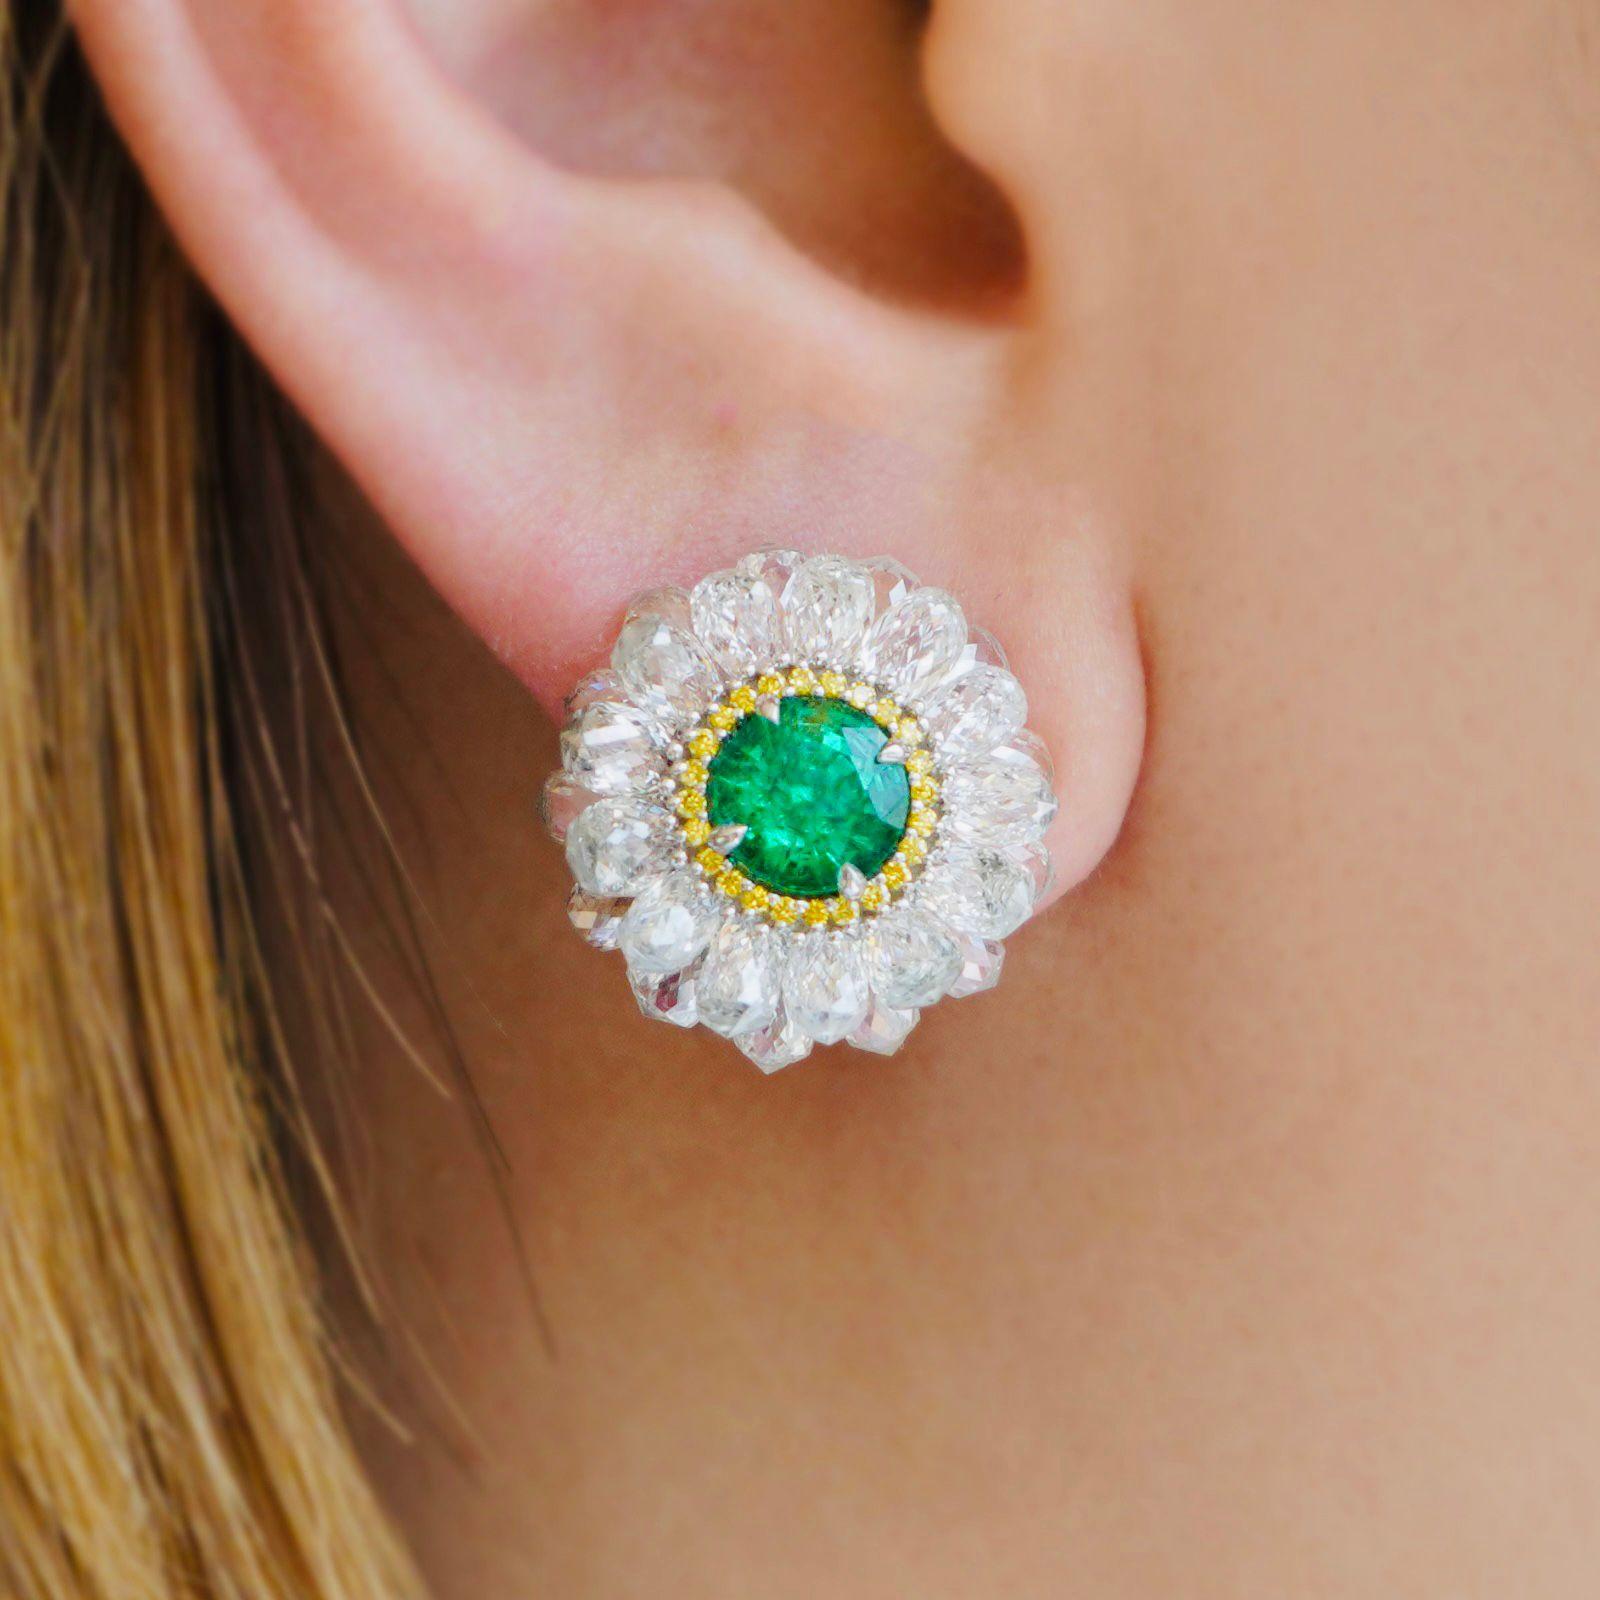 With such an unusual and striking combination of stones and colors, the composition of these Contemporary Zambian Emerald Diamond Halo Button Earrings, made in the 21st century, immediately draws us in. The earrings are crafted in 18K white gold and